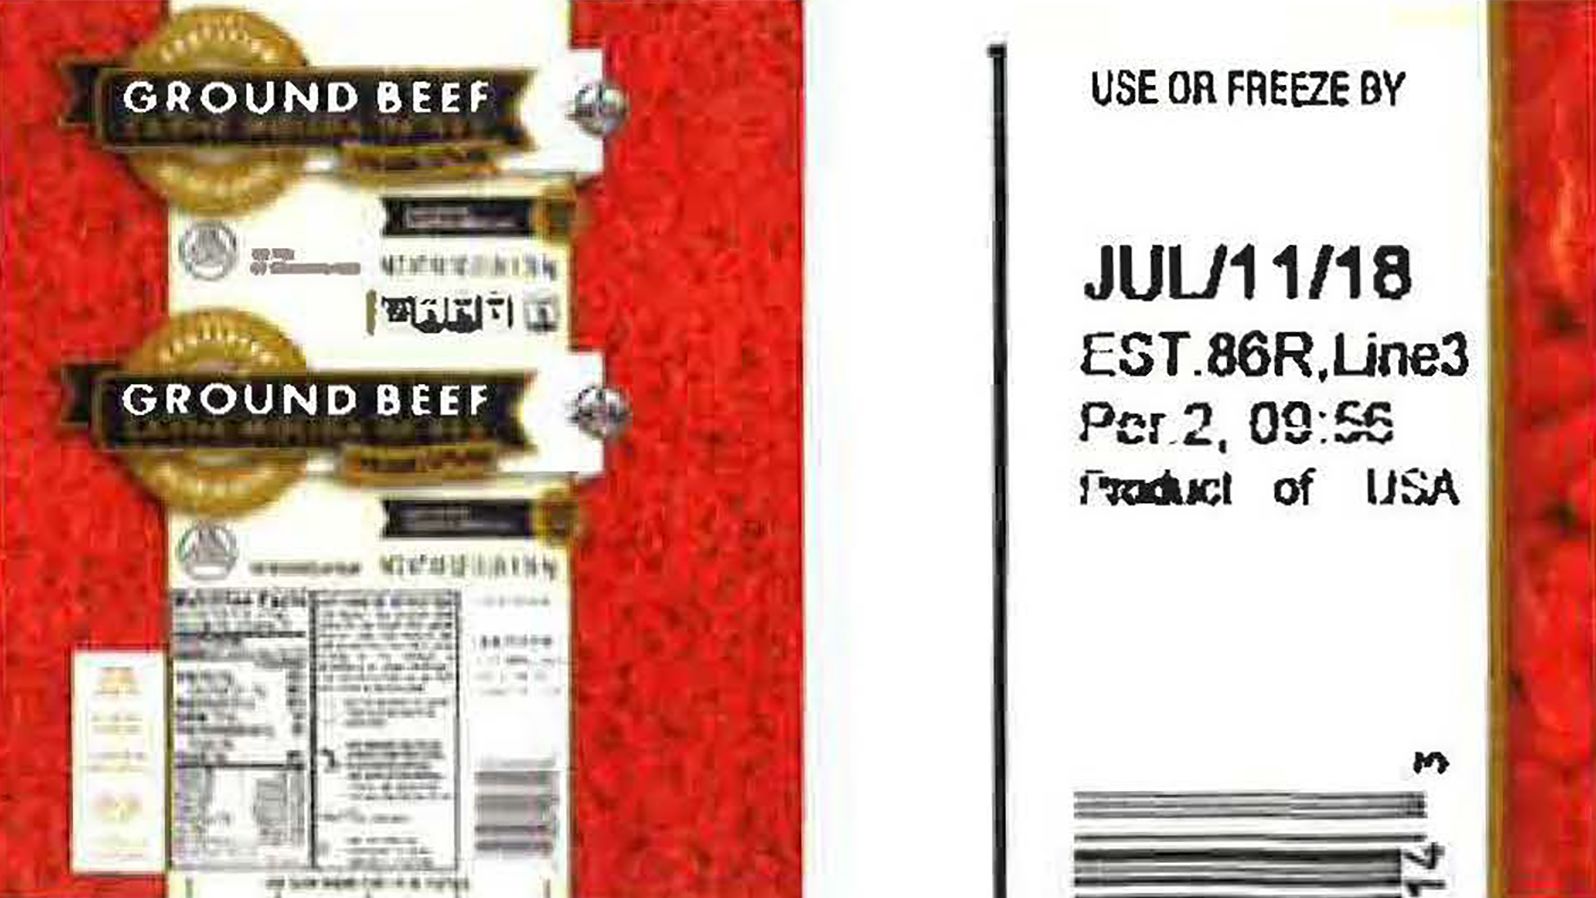 Cargill Meat Solutions issued a recall for 132,606 pounds of ground beef.